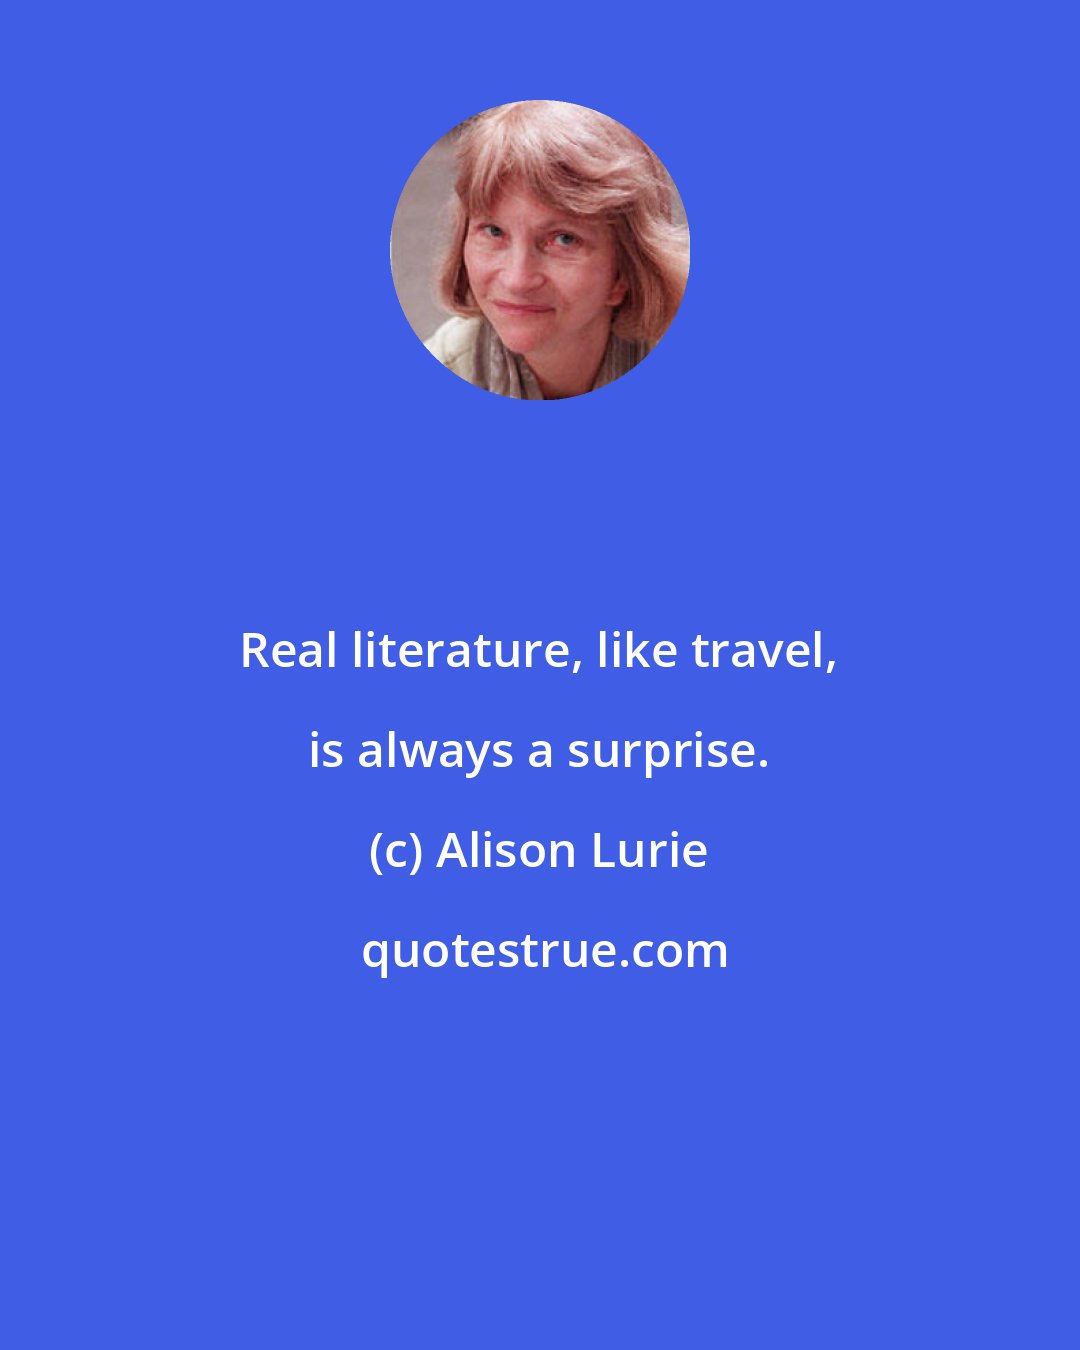 Alison Lurie: Real literature, like travel, is always a surprise.